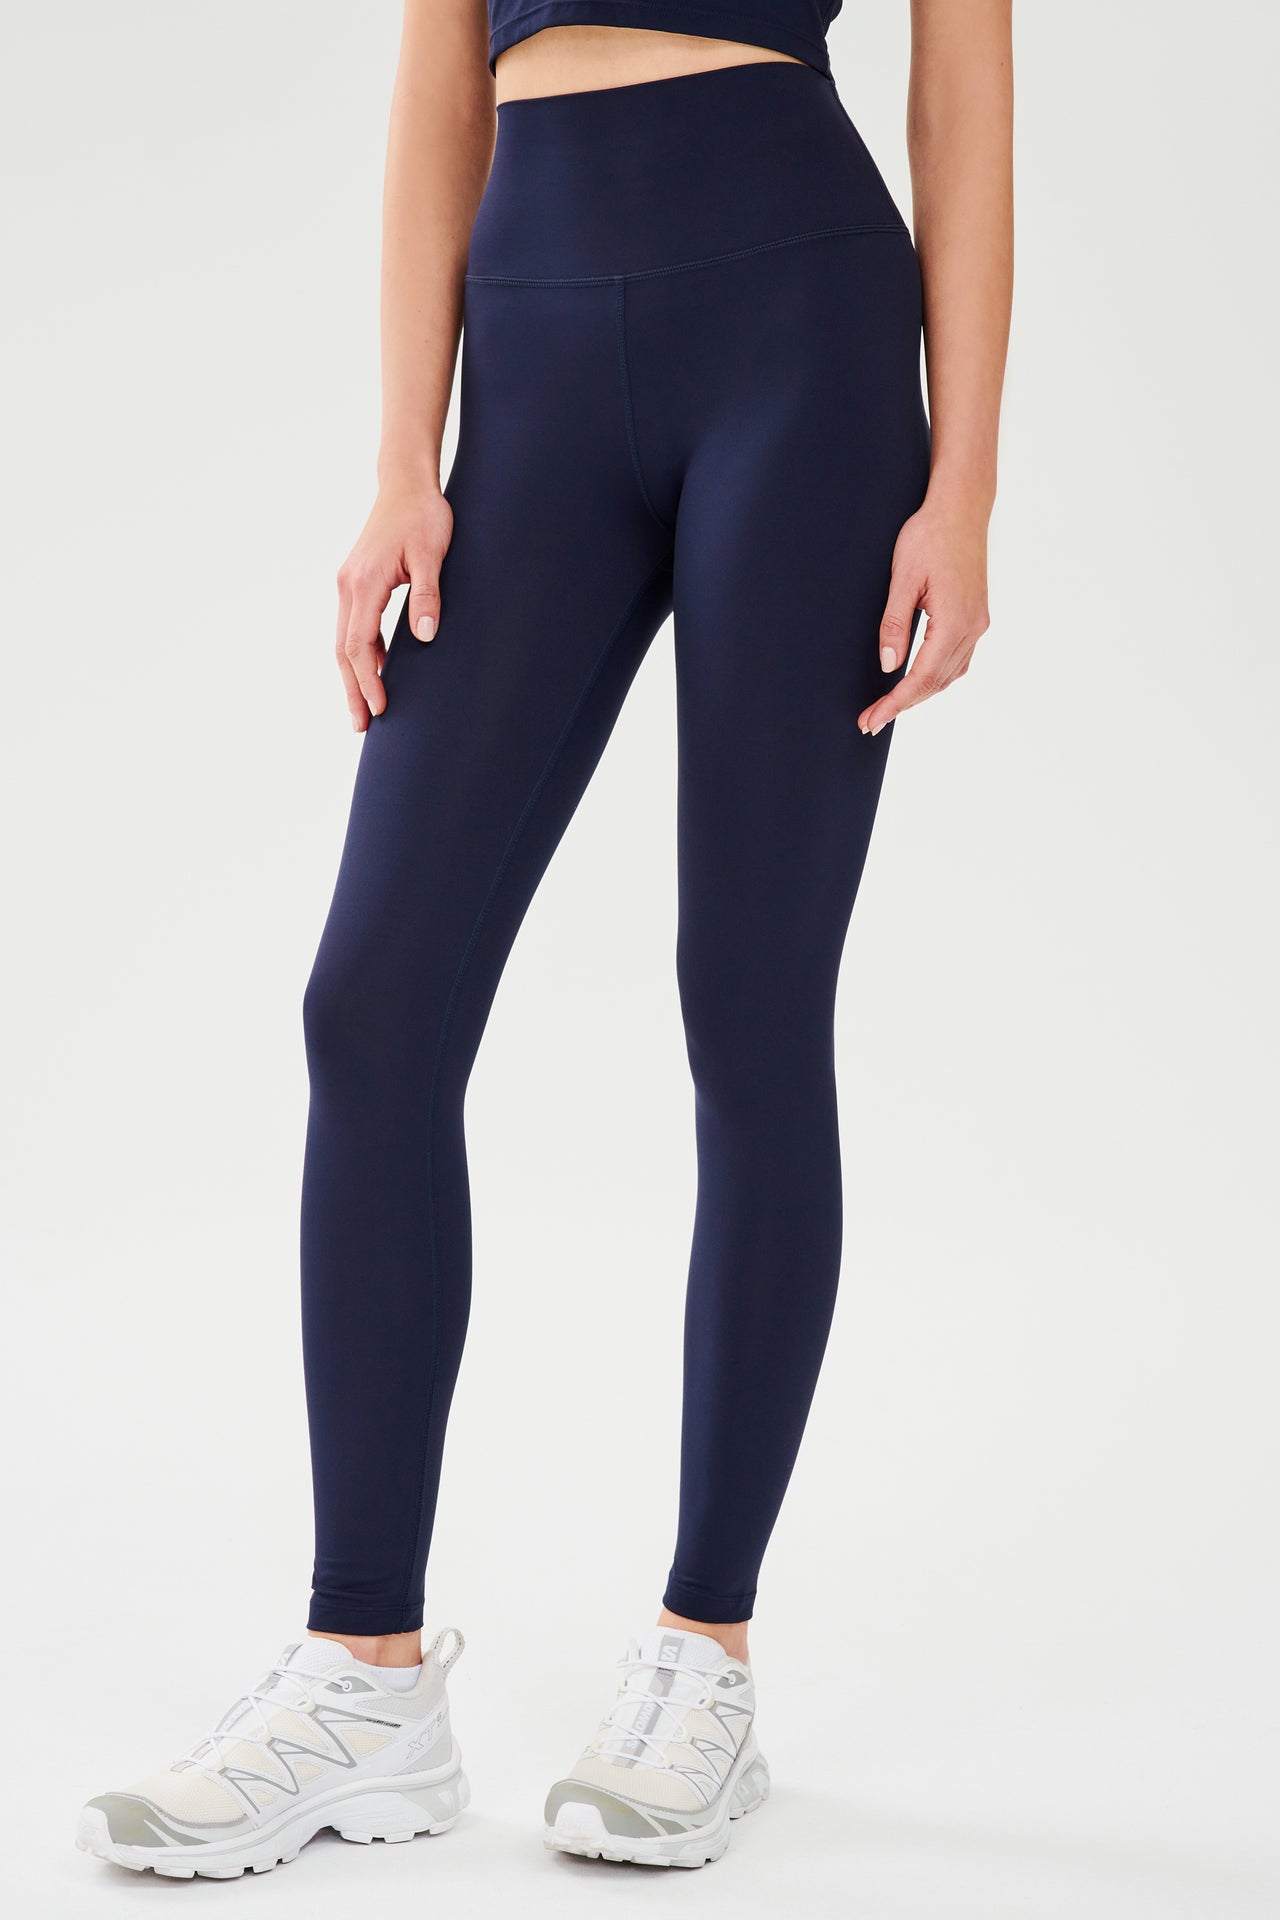 Front view of model wearing dark blue high waist leggings paired with white shoes